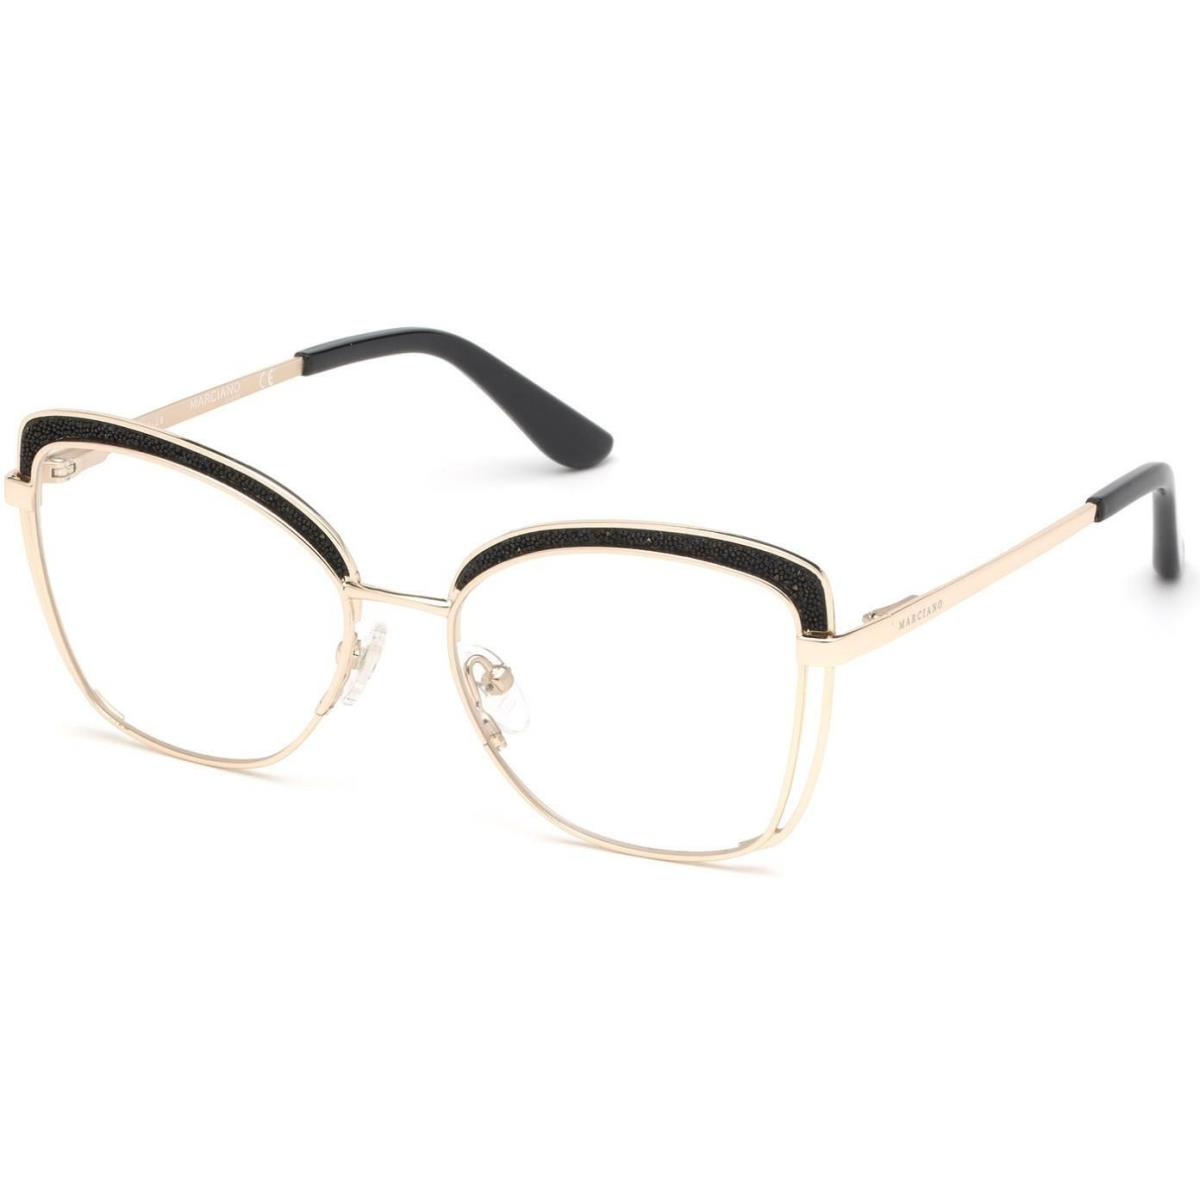 Guess By Marciano GM 0344 Eyeglasses 032 Gold